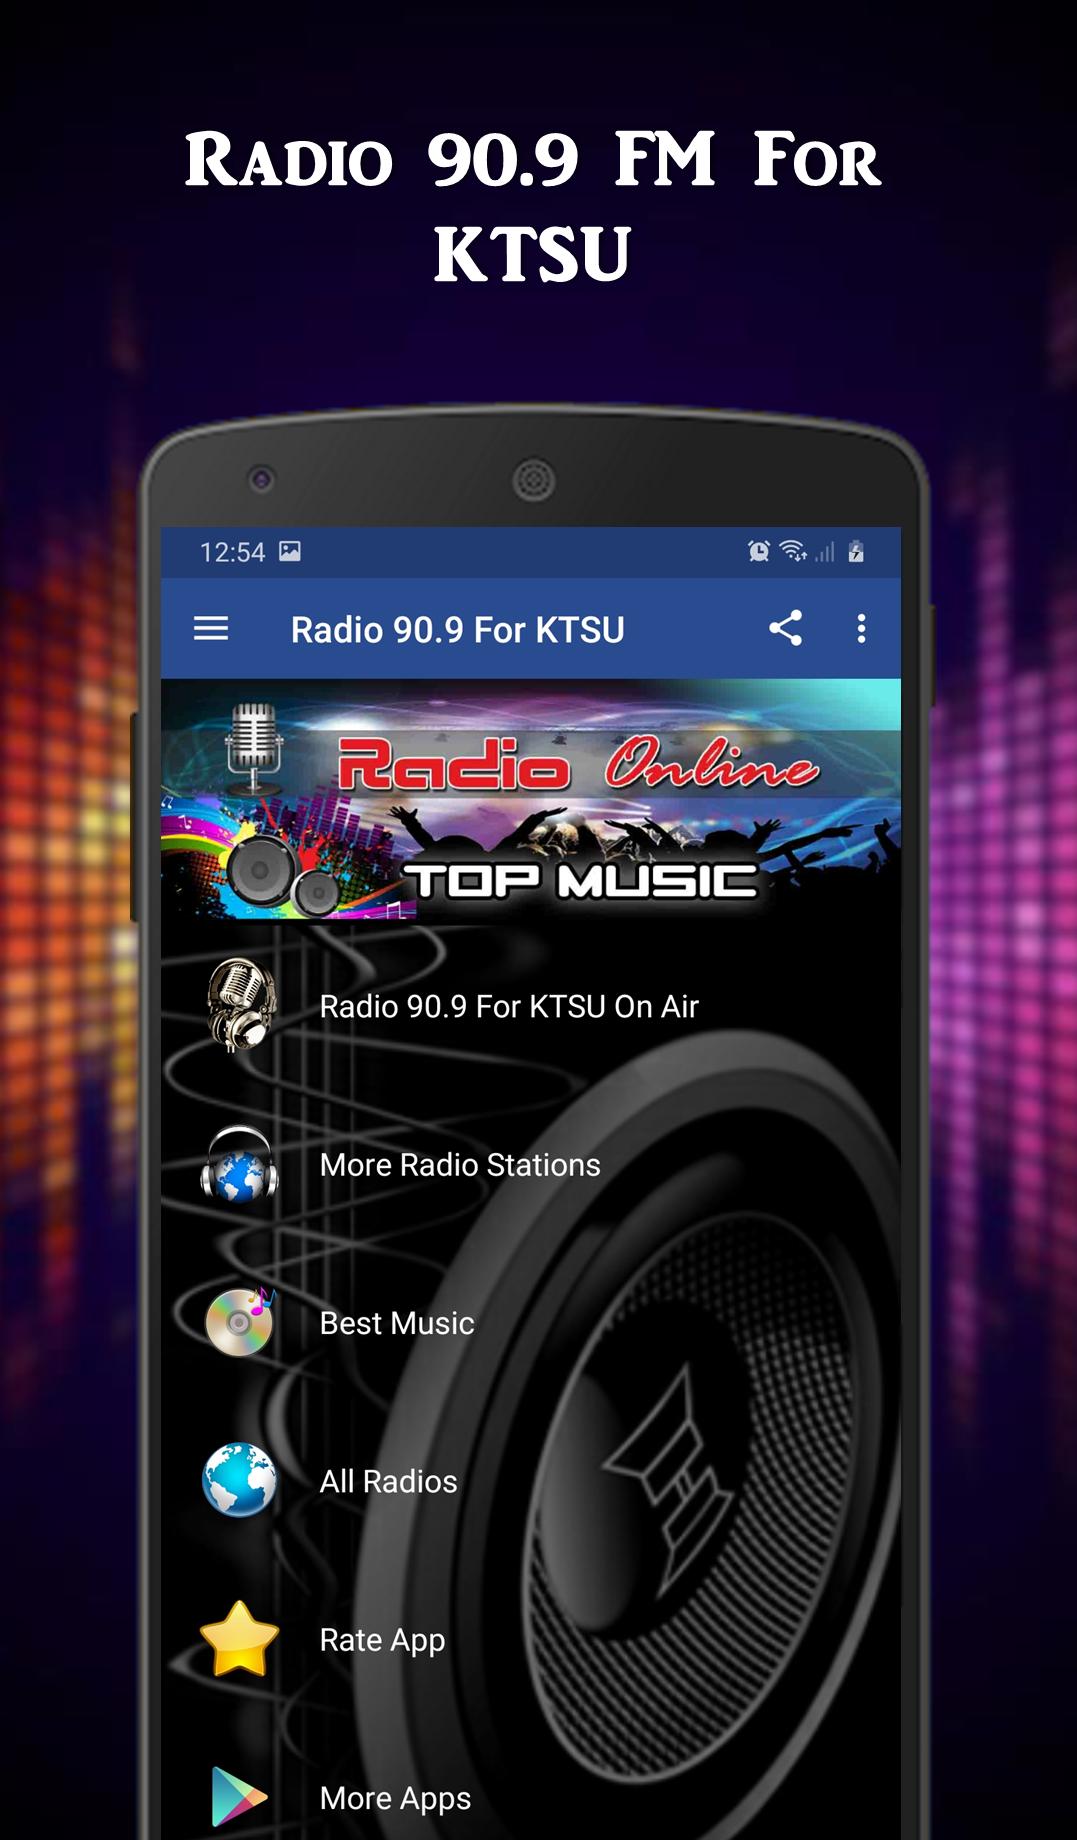 Radio 90.9 FM For KTSU for Android - APK Download